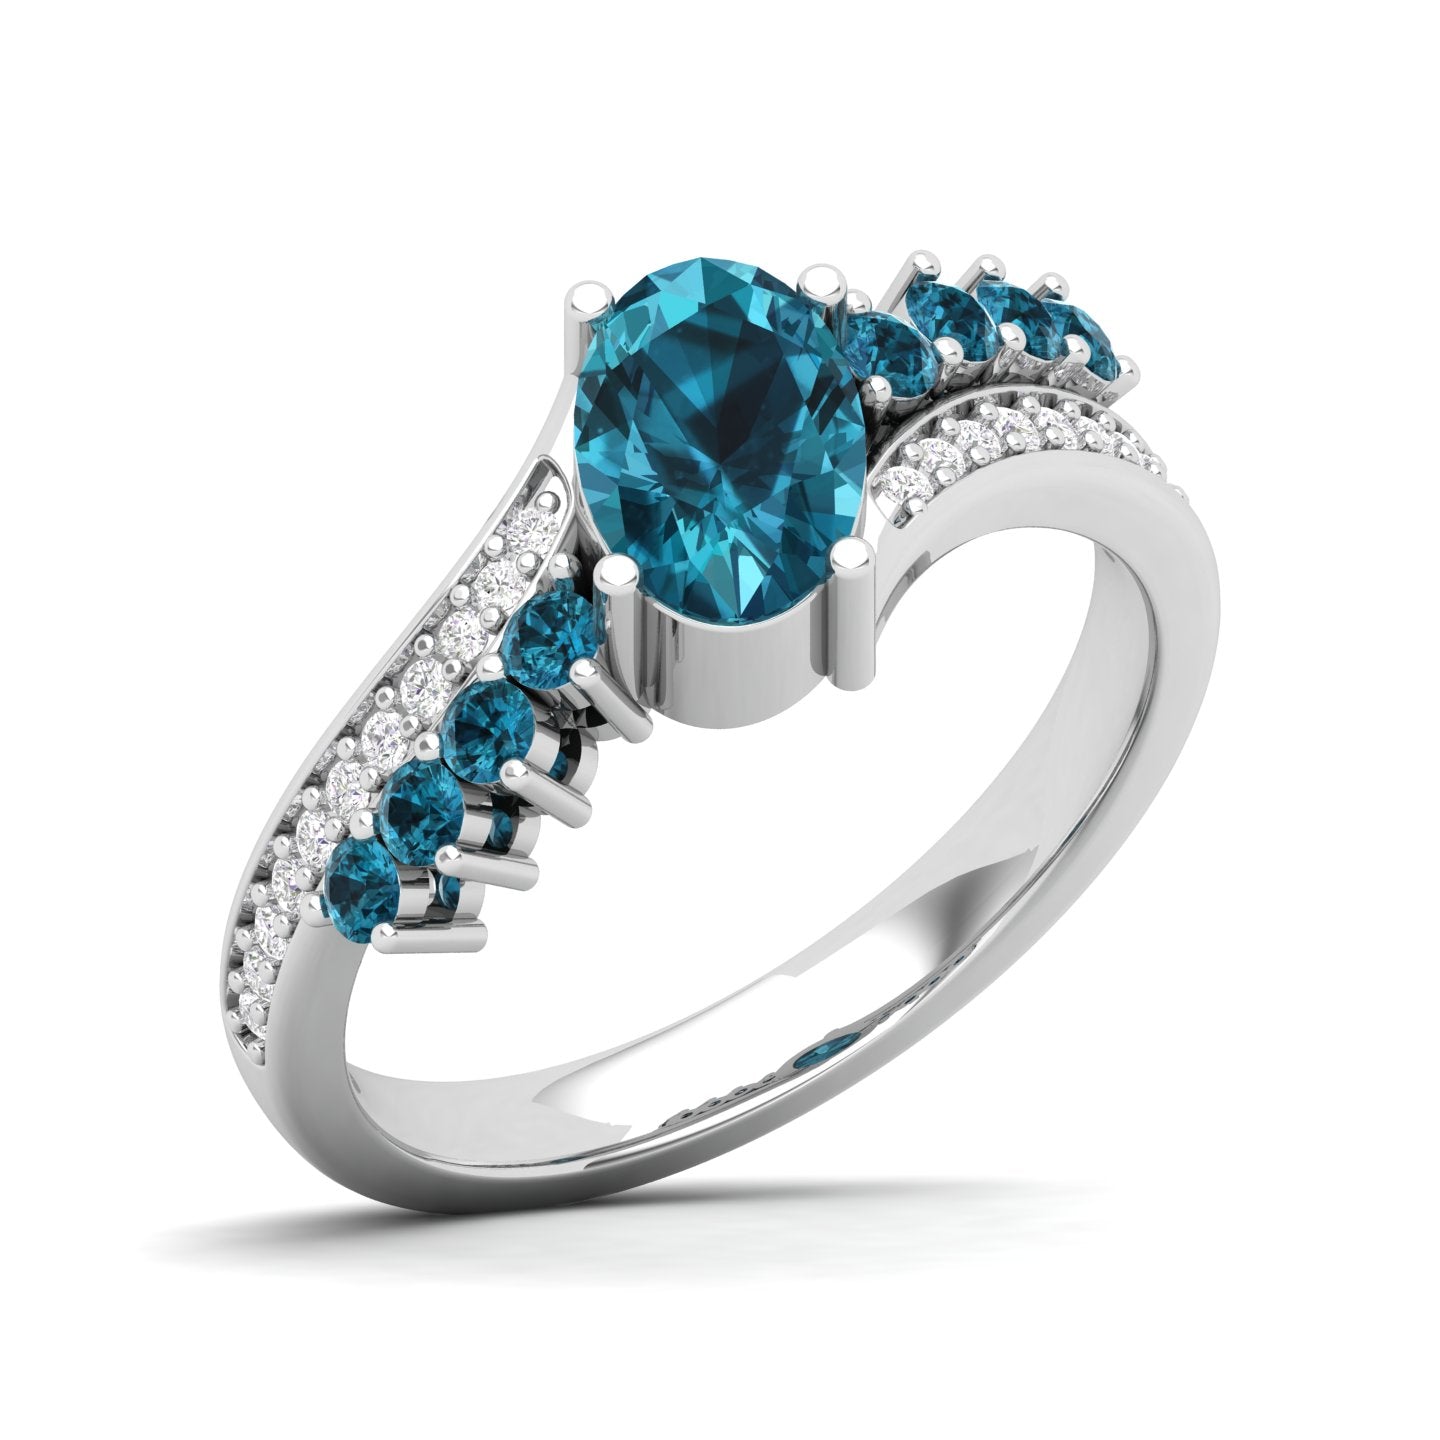 Maurya Solitaire Oval Blue Sapphire Color Splash Engagement Ring